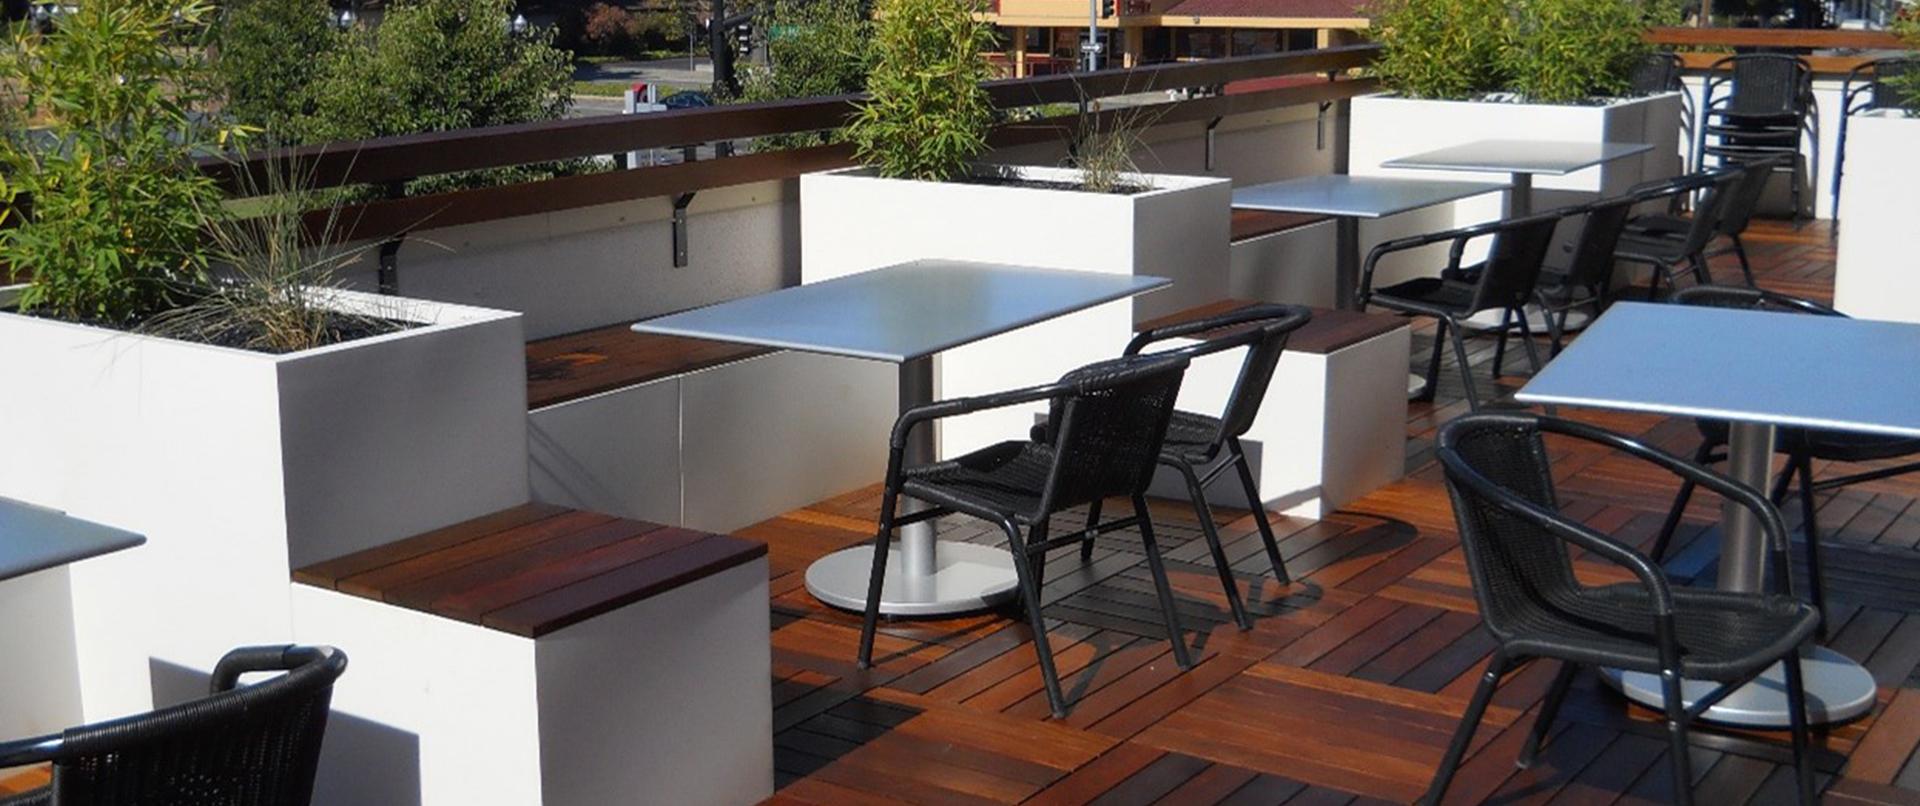 Rooftop with Aluminum Cube Seating and Decor